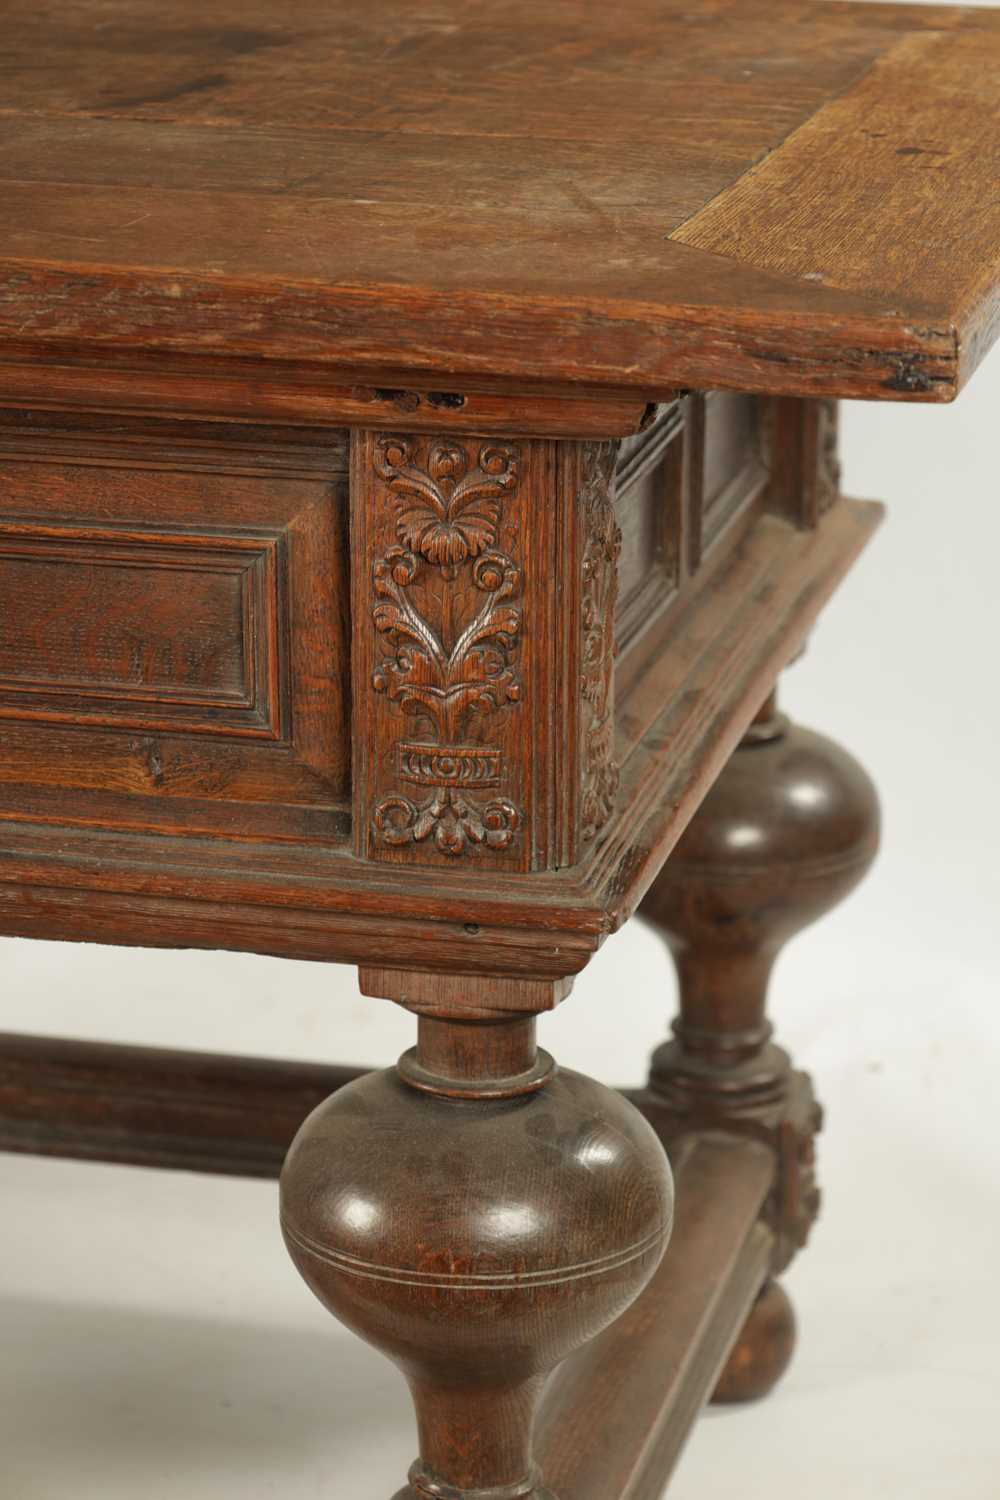 AN 18TH CENTURY FLEMISH OAK TABLE - Image 2 of 7